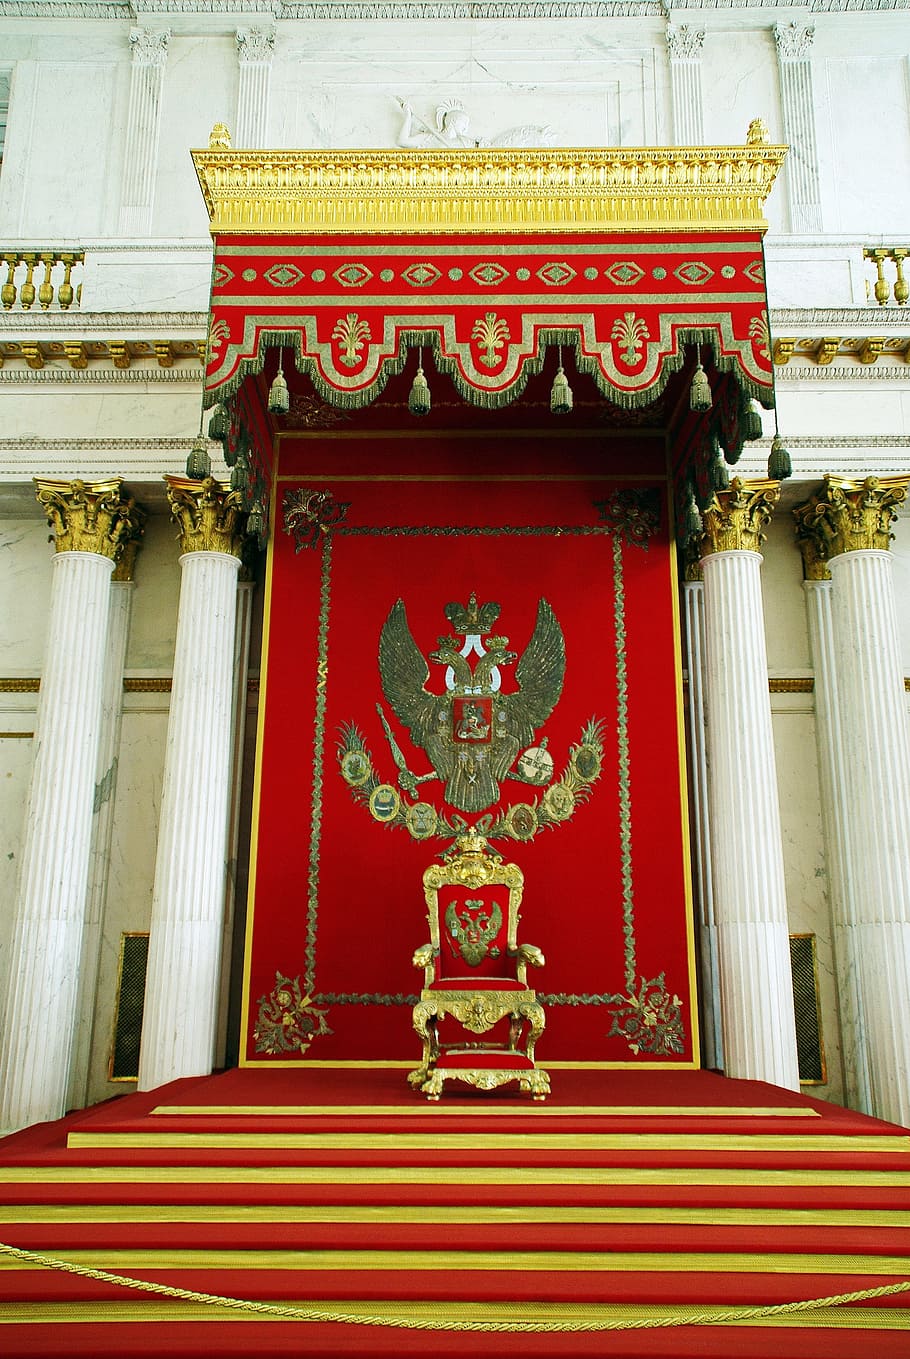 red and gold chair, Russia, St-Petersburg, Hermitage, Throne